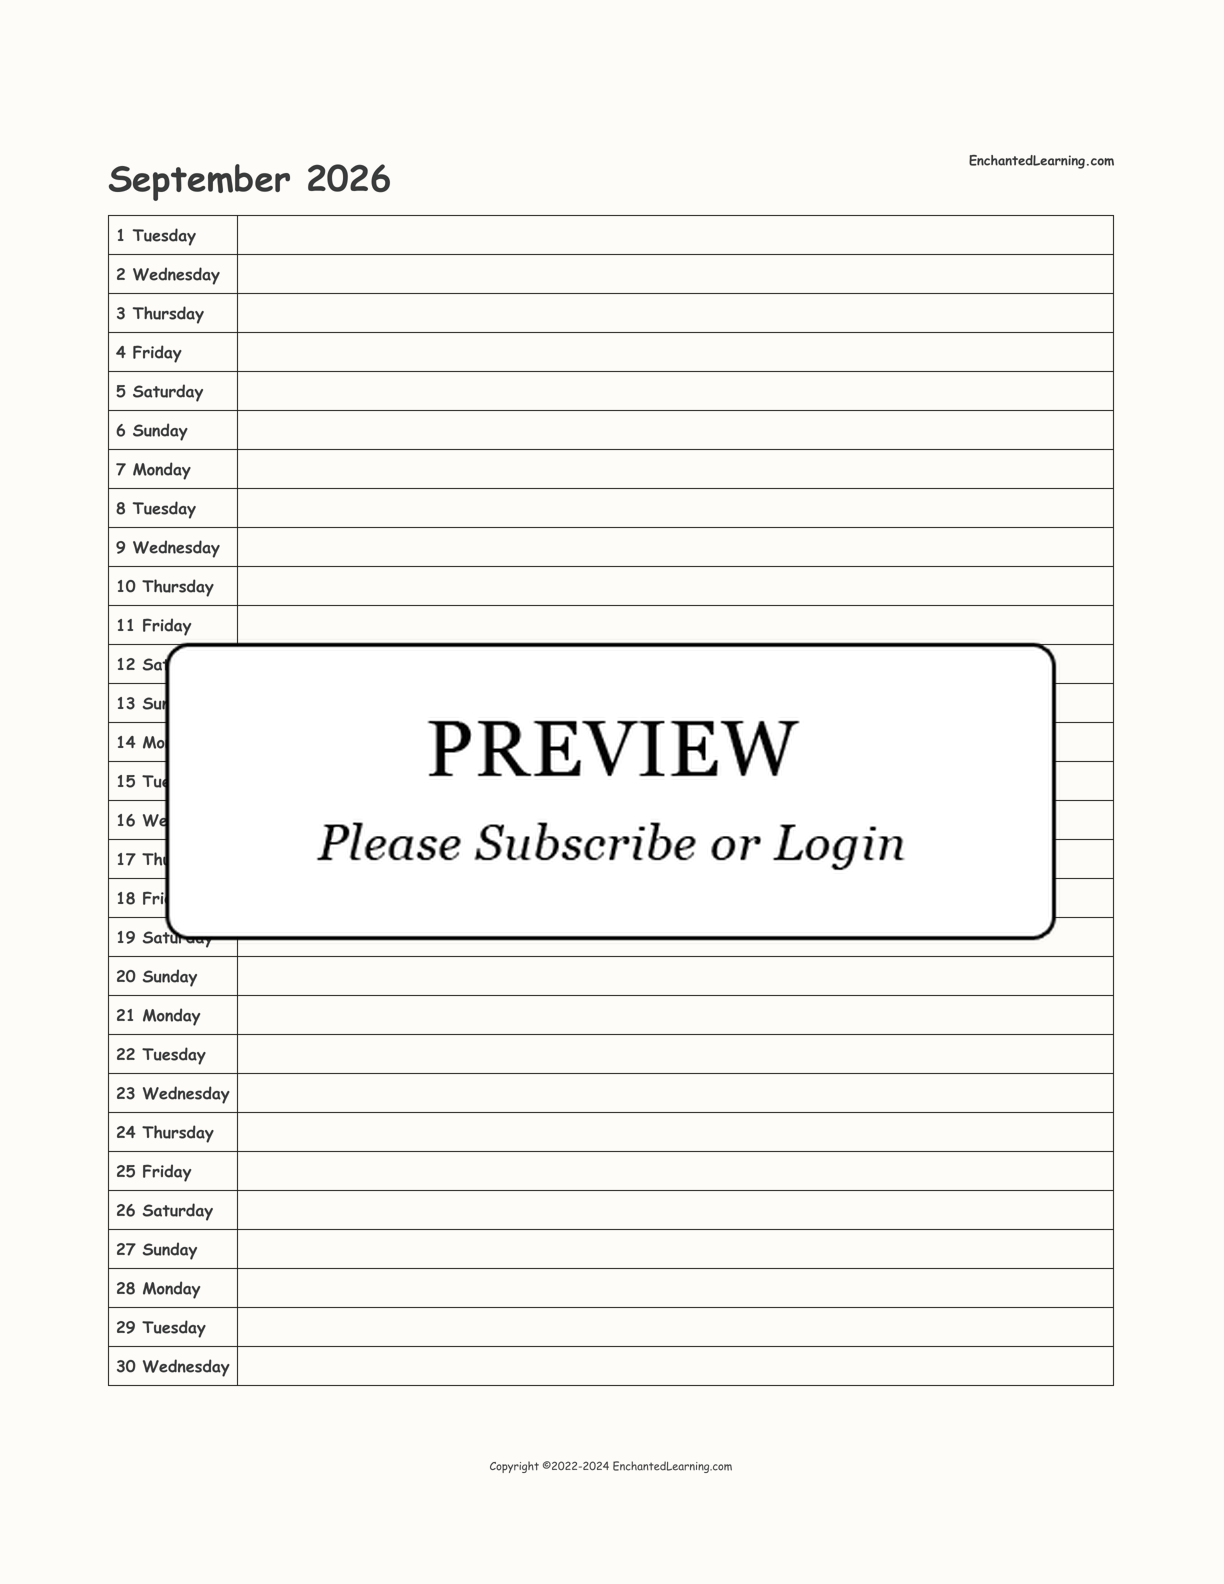 2026 Scheduling Calendar interactive printout page 9